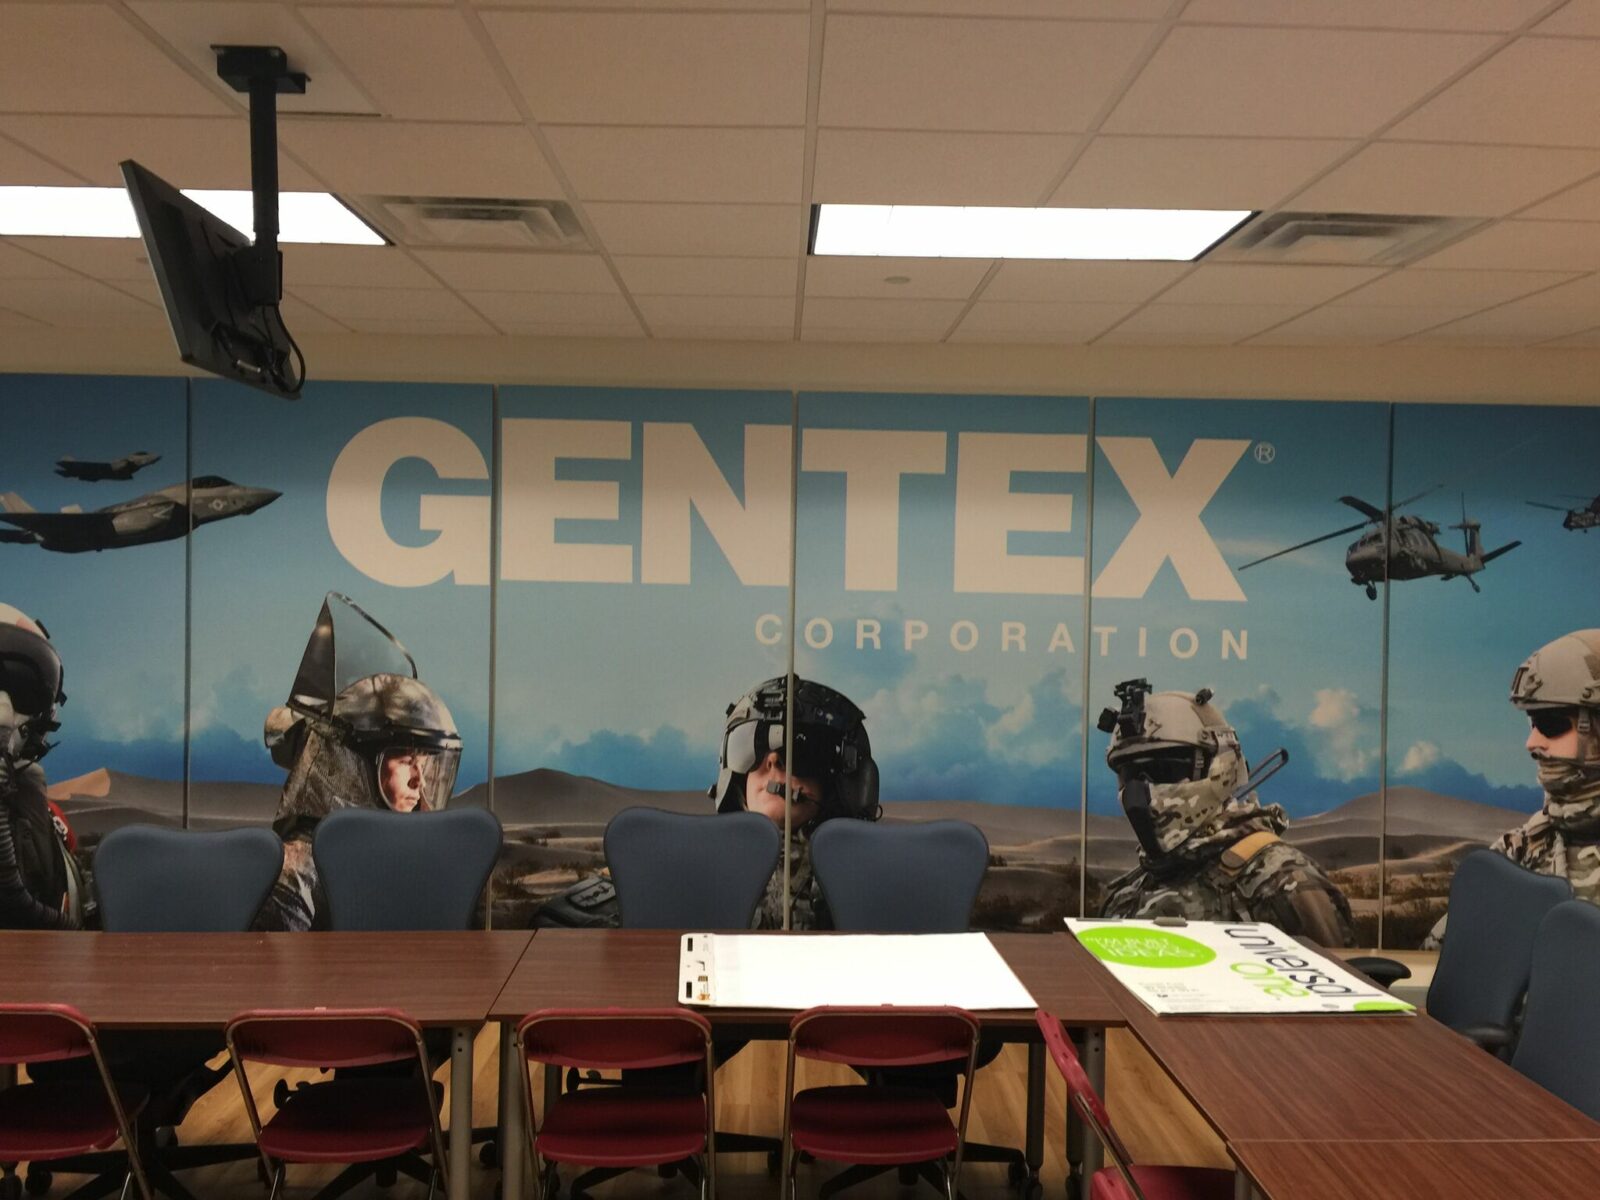 Branding a conference room with custom imaged sound panels